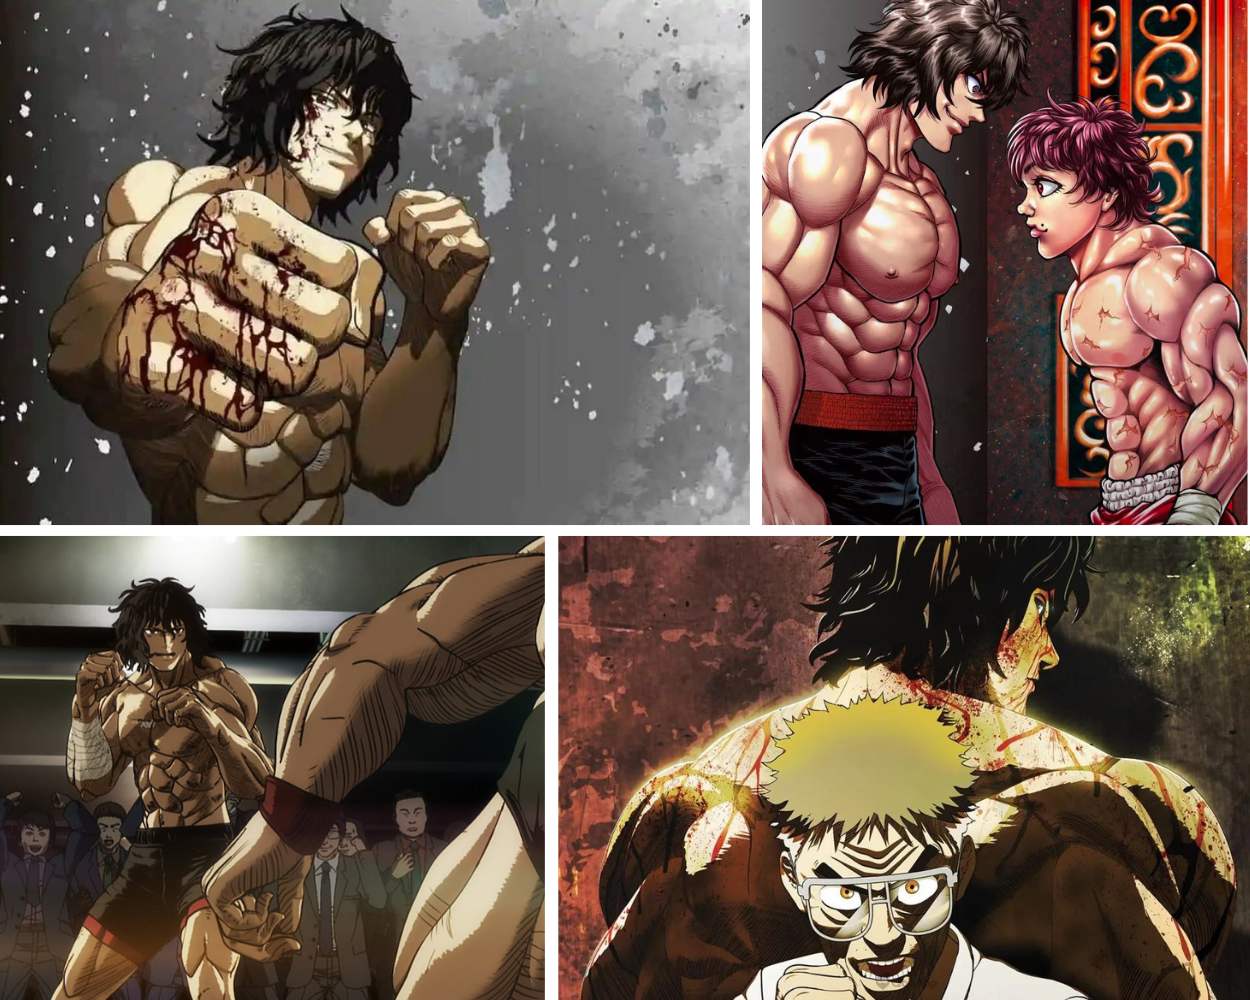 Kengan Ashura - One Of The Best Boxing Anime